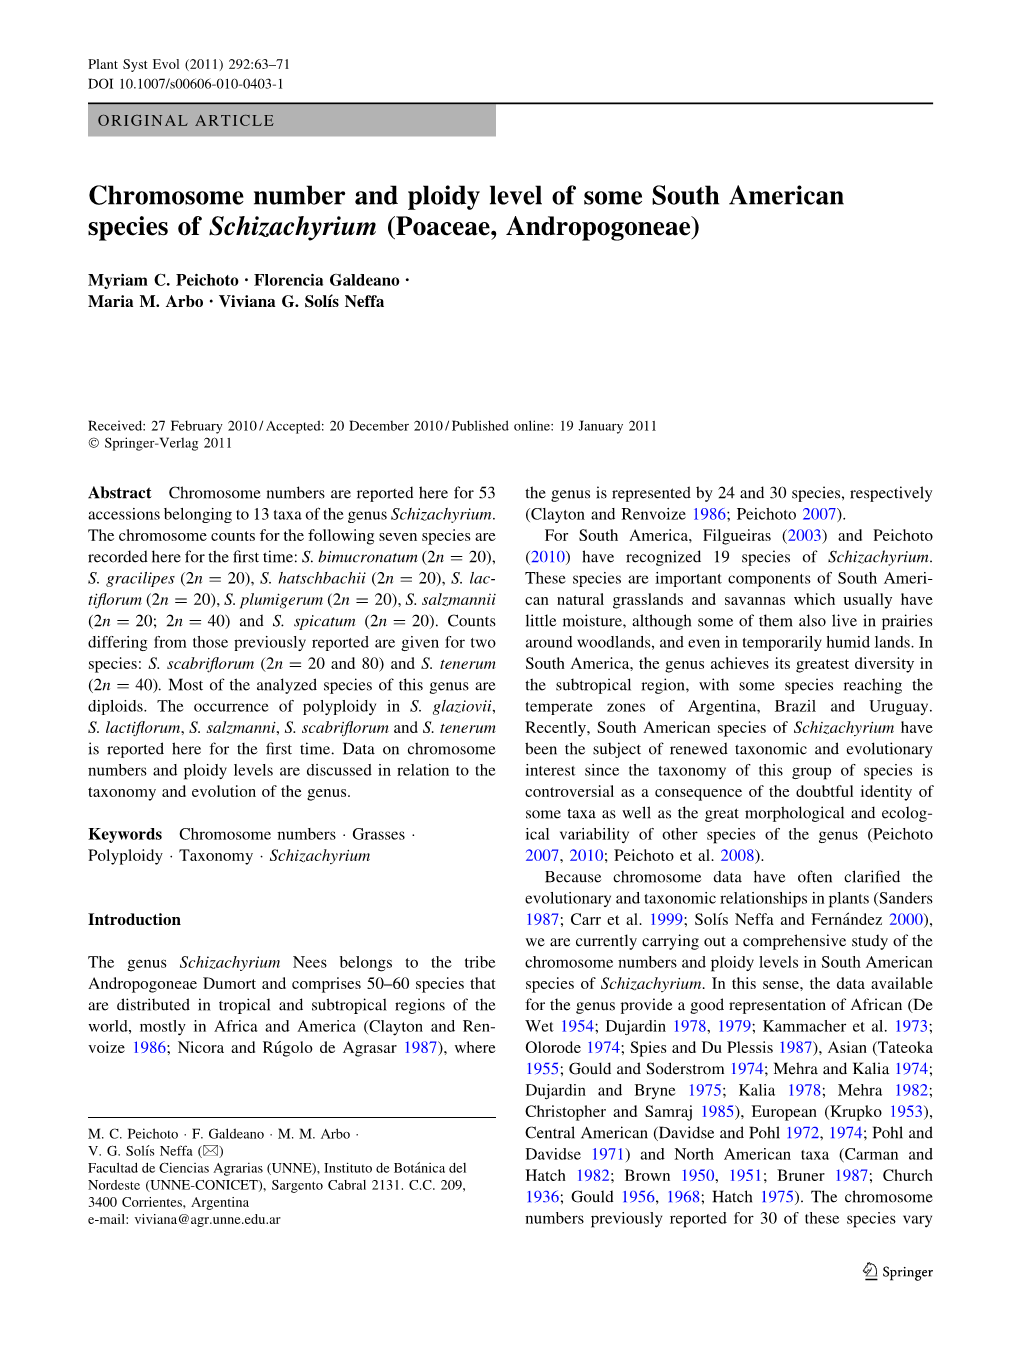 Chromosome Number and Ploidy Level of Some South American Species of Schizachyrium (Poaceae, Andropogoneae)